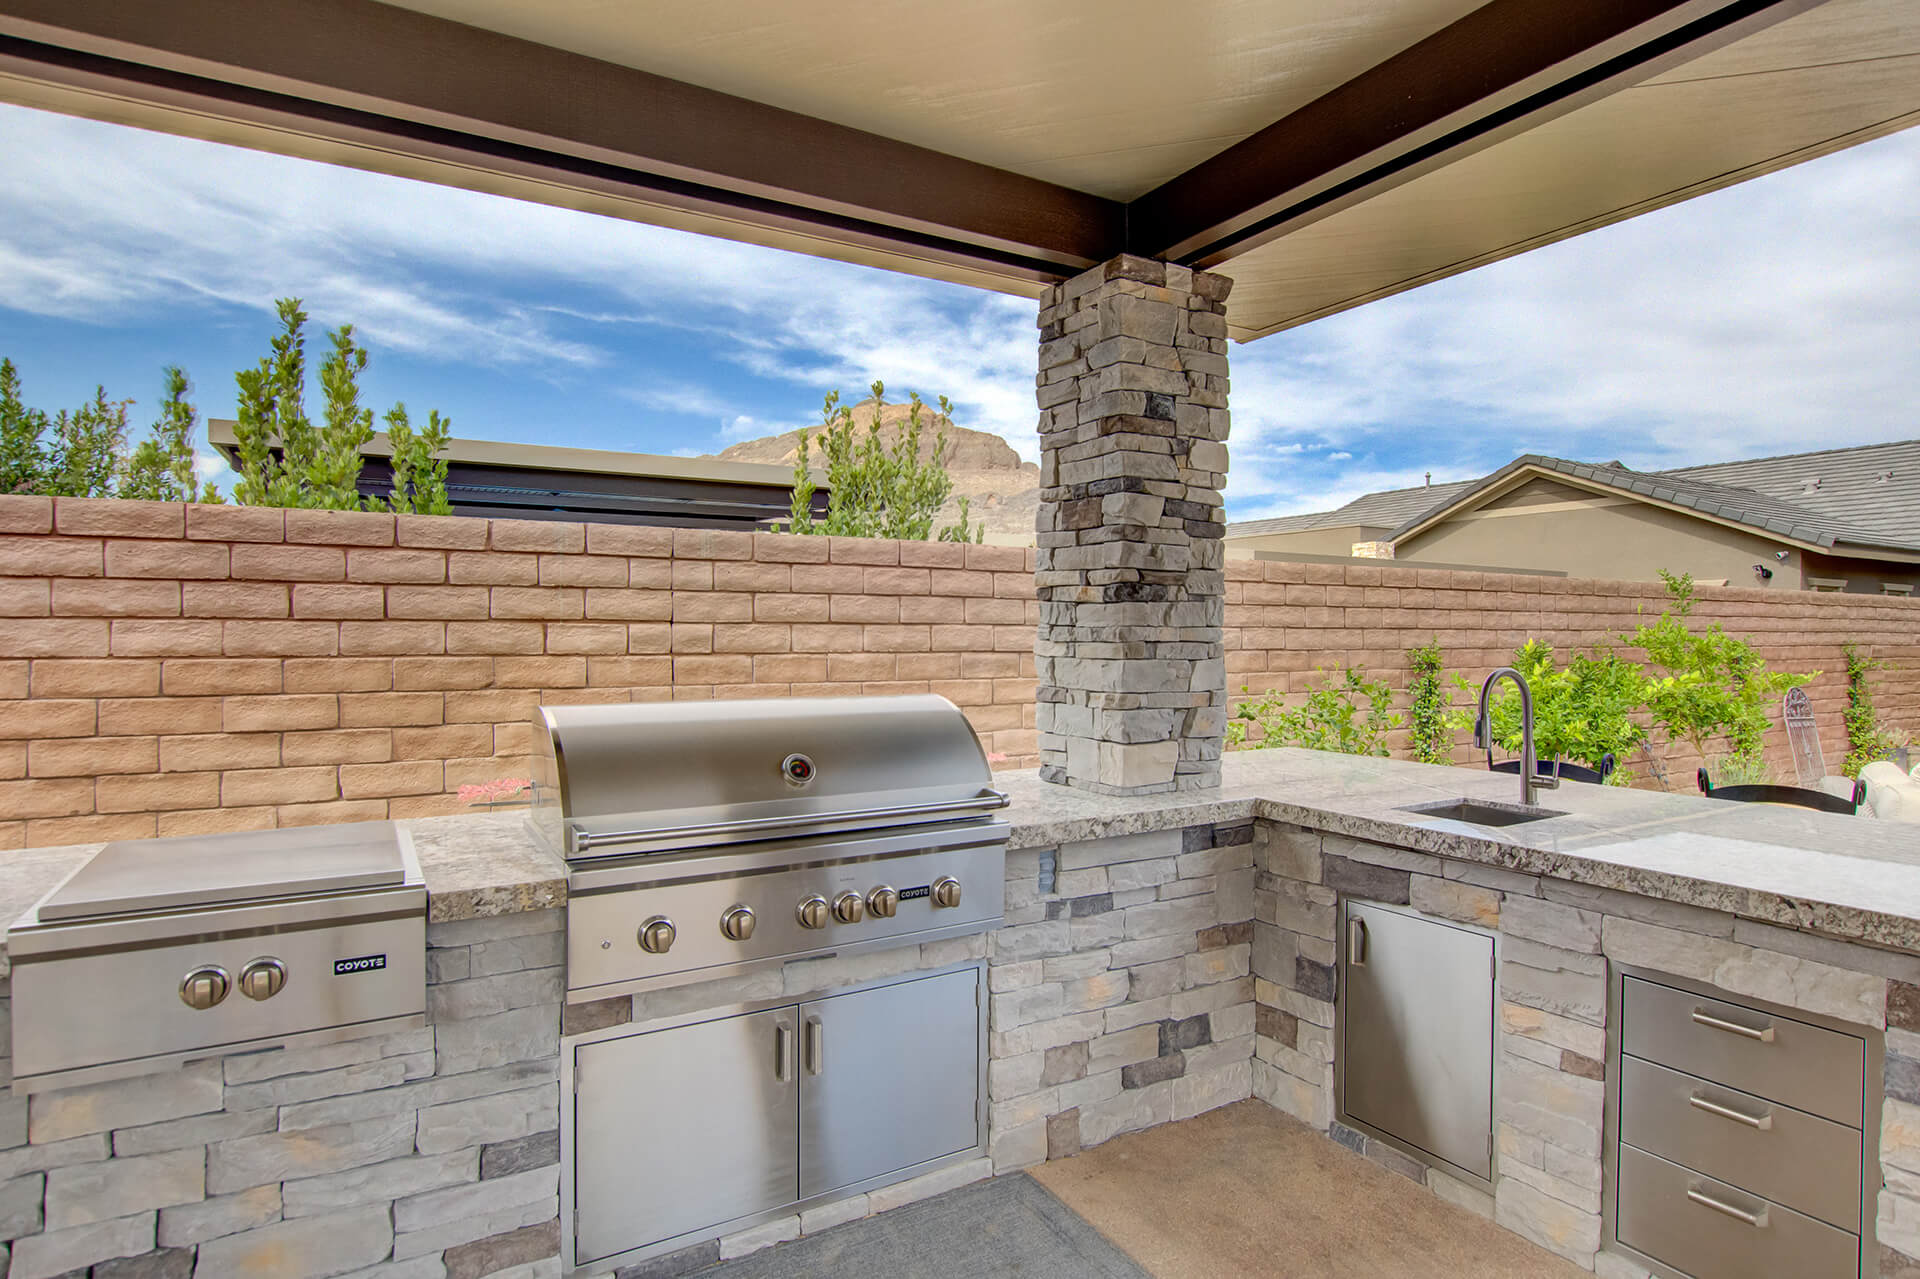 Custom Outdoor Living - Custom Outdoor Kitchen and Livinng Area Design and Construction